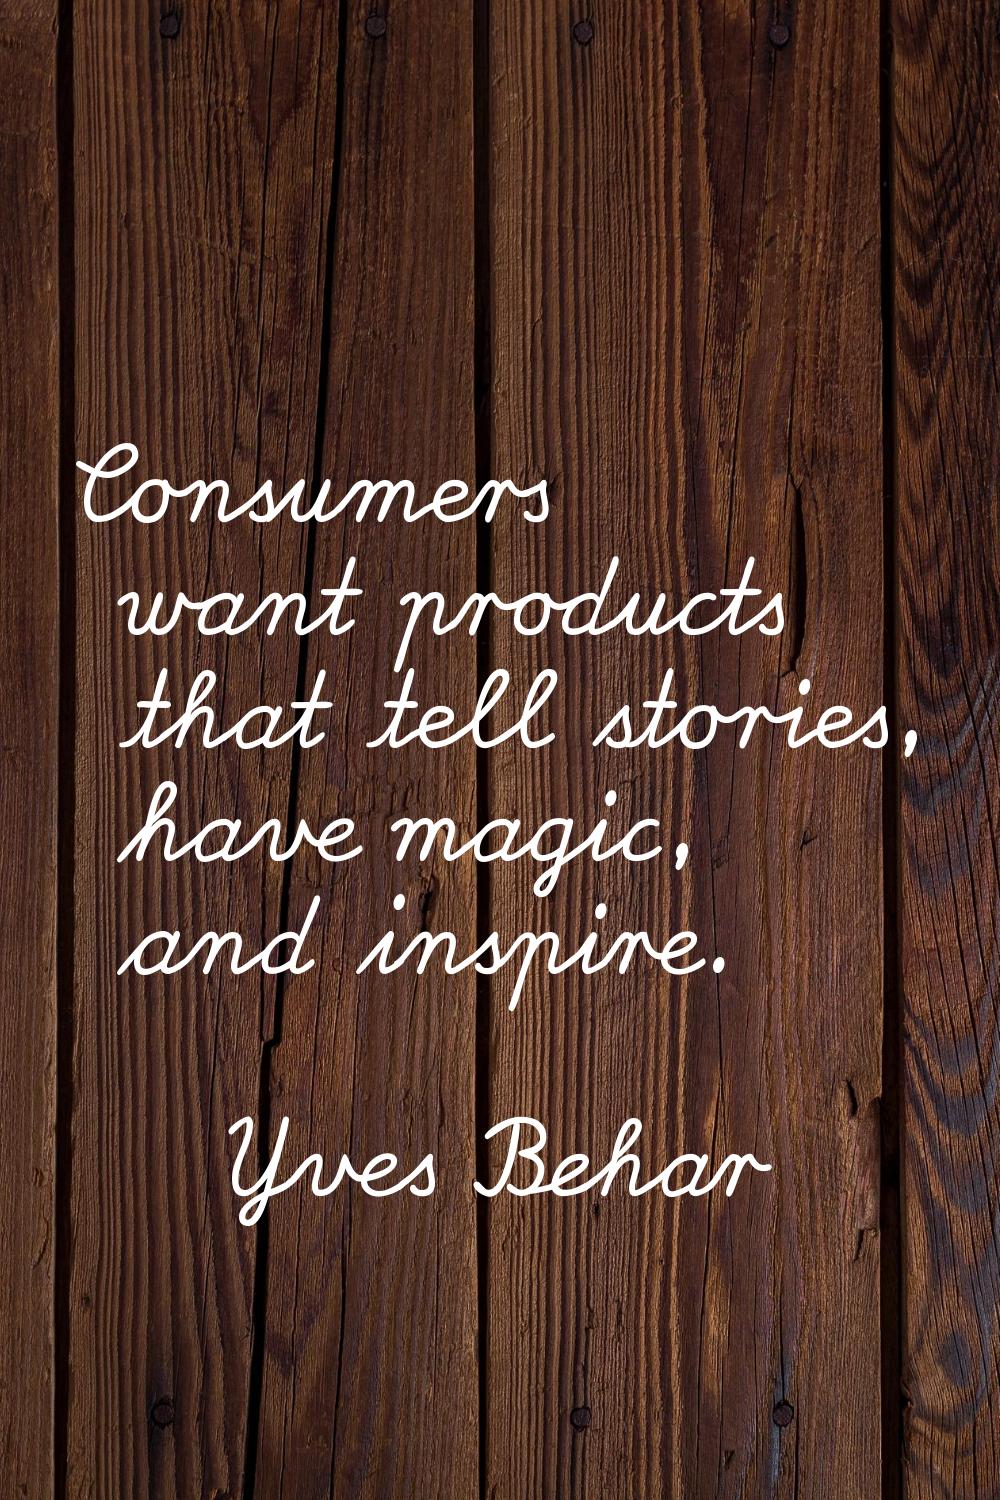 Consumers want products that tell stories, have magic, and inspire.